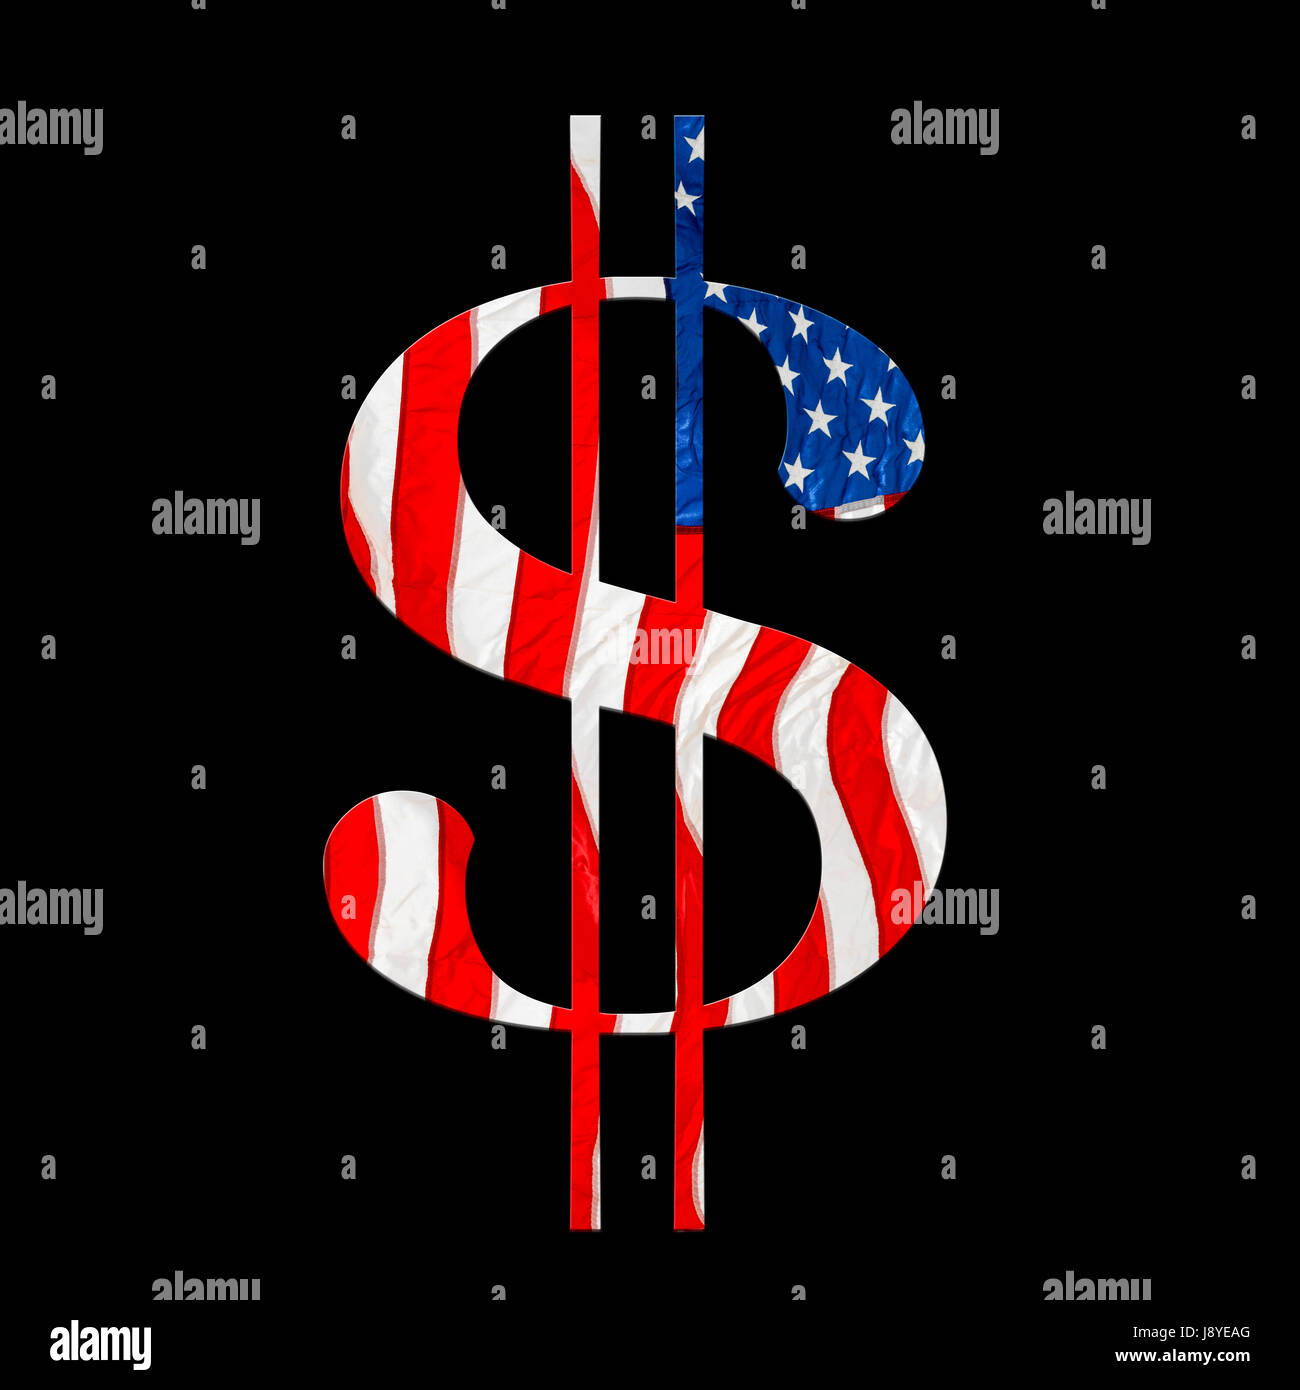 American dollar symbol wrapped in the national flag, isolated against the black background Stock Photo